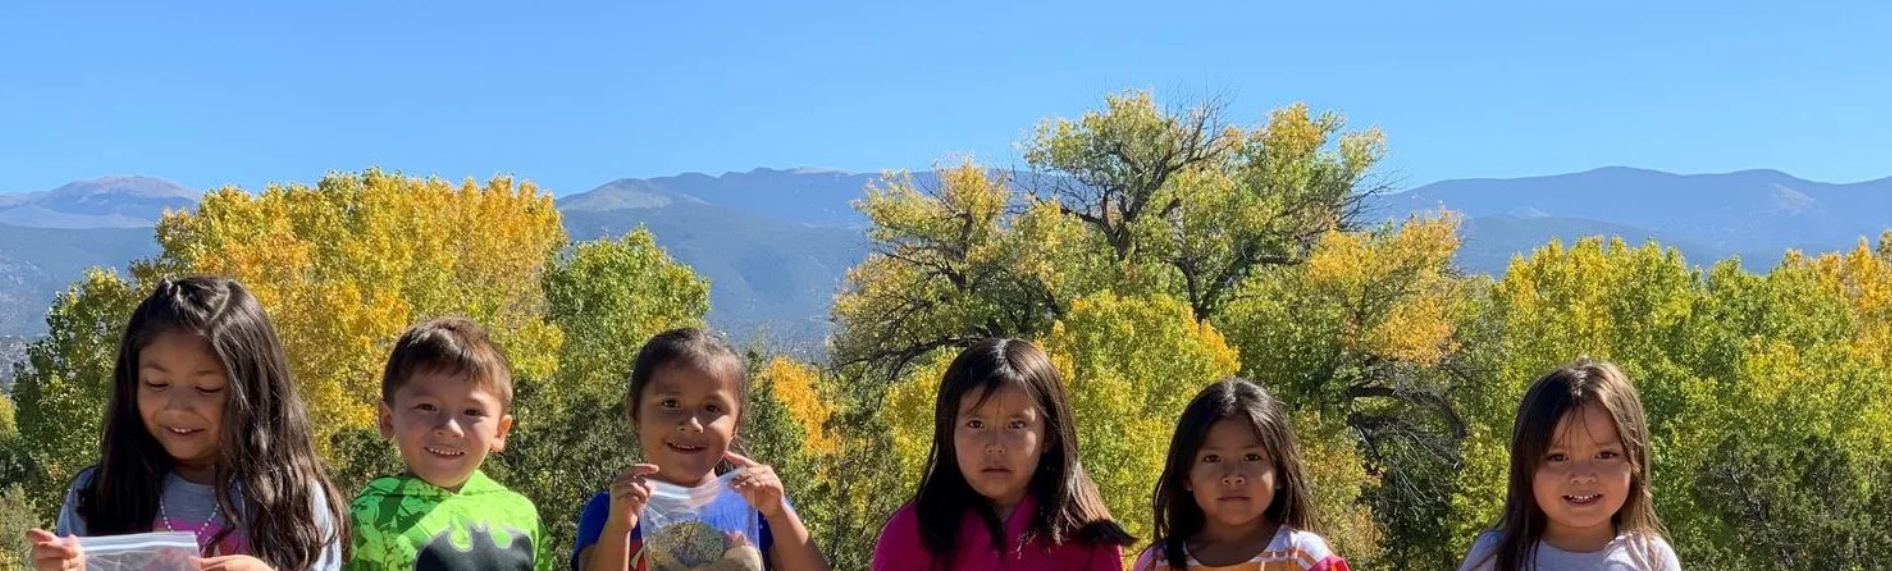 young children in front of mountain